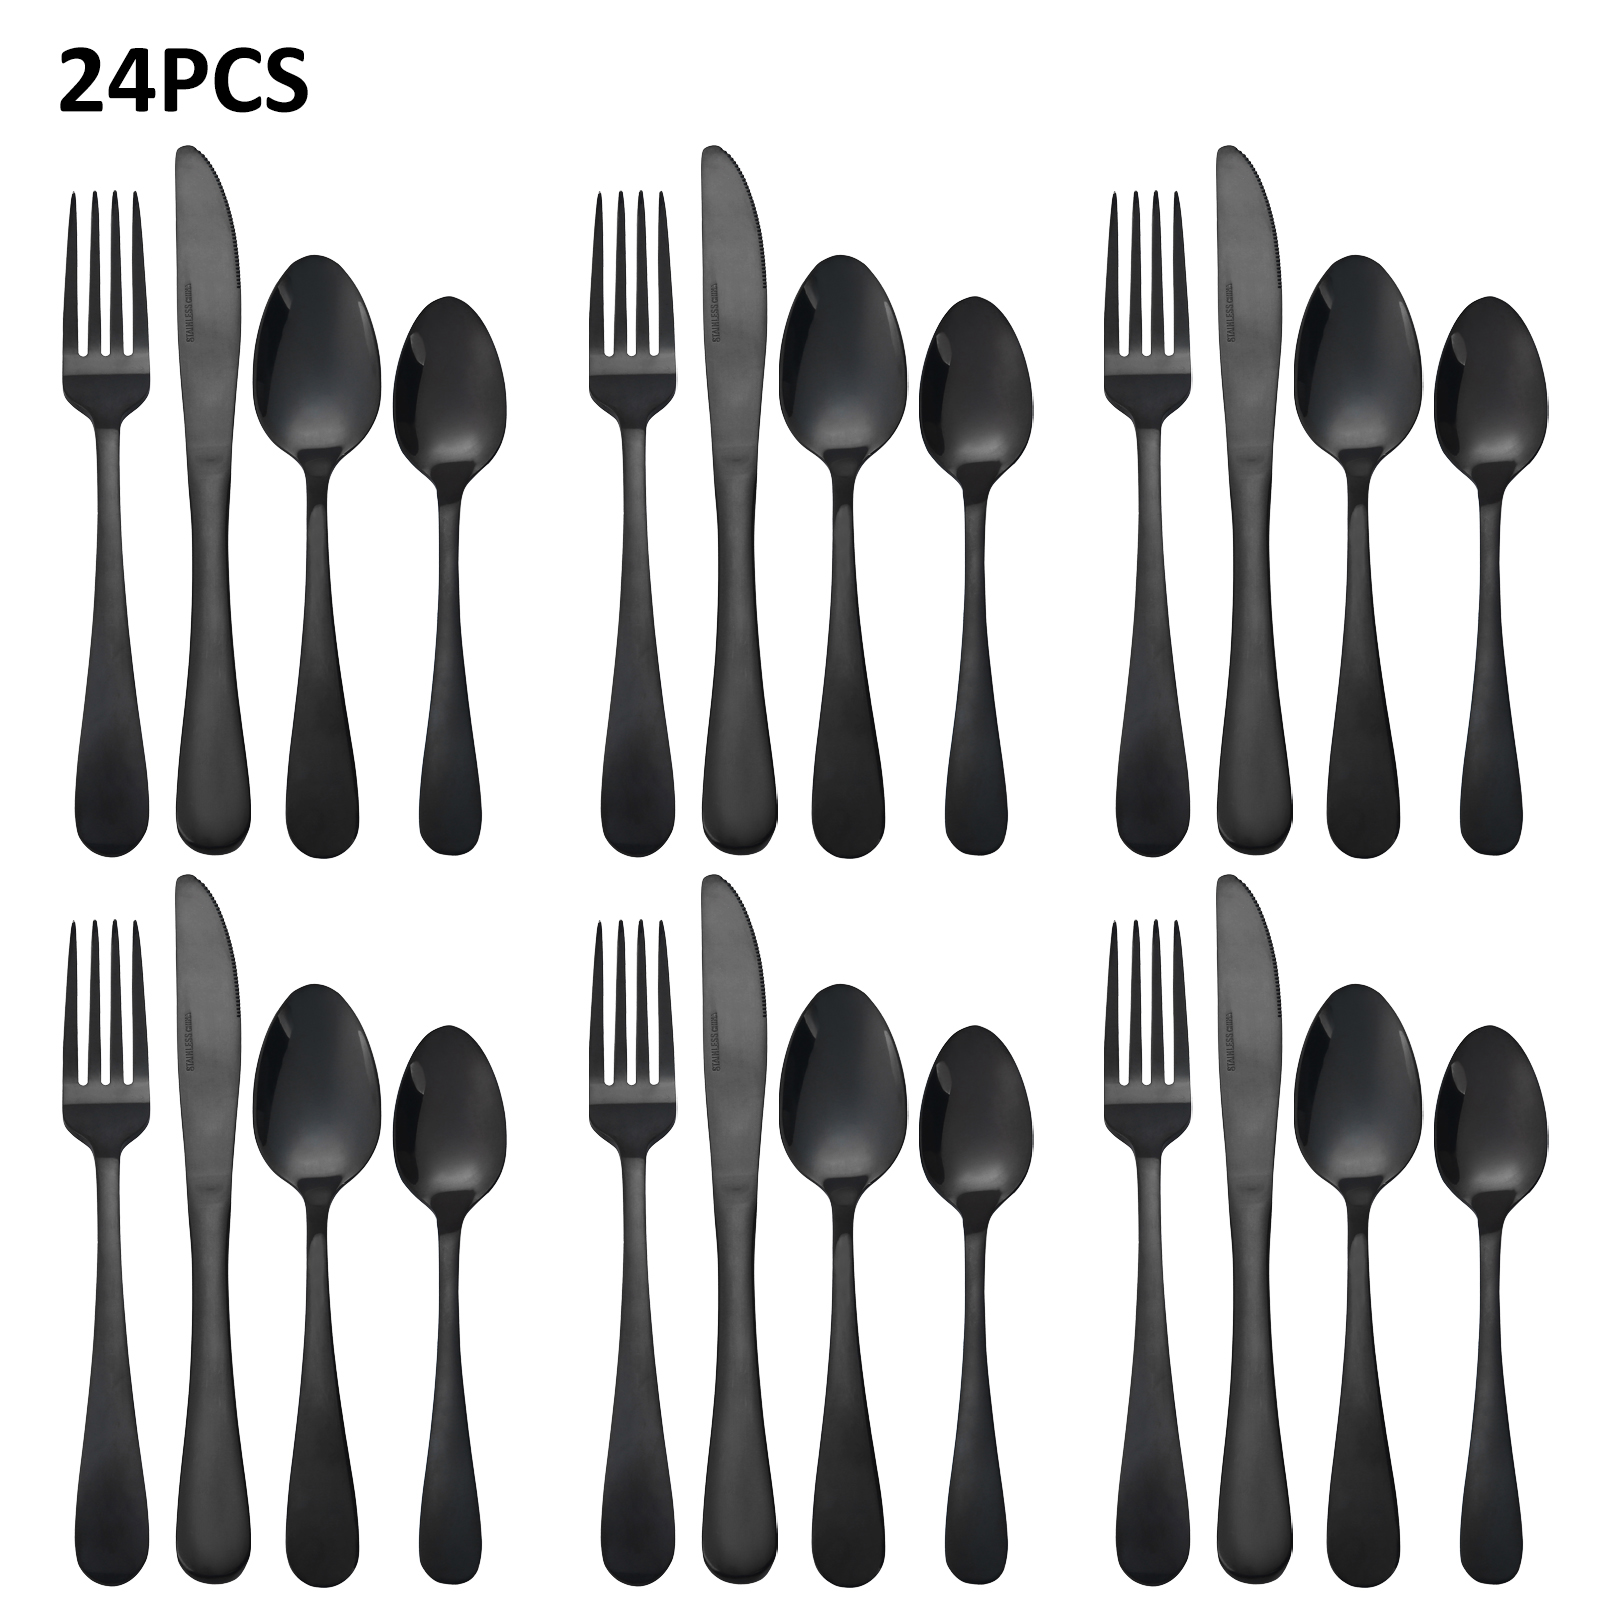 

24pcs Stainless Steel Flatware Set, Silverware Set Service For 6, Includes Knife Fork Spoon Cutlery Set, For Restaurants, Hotels, Family Gatherings